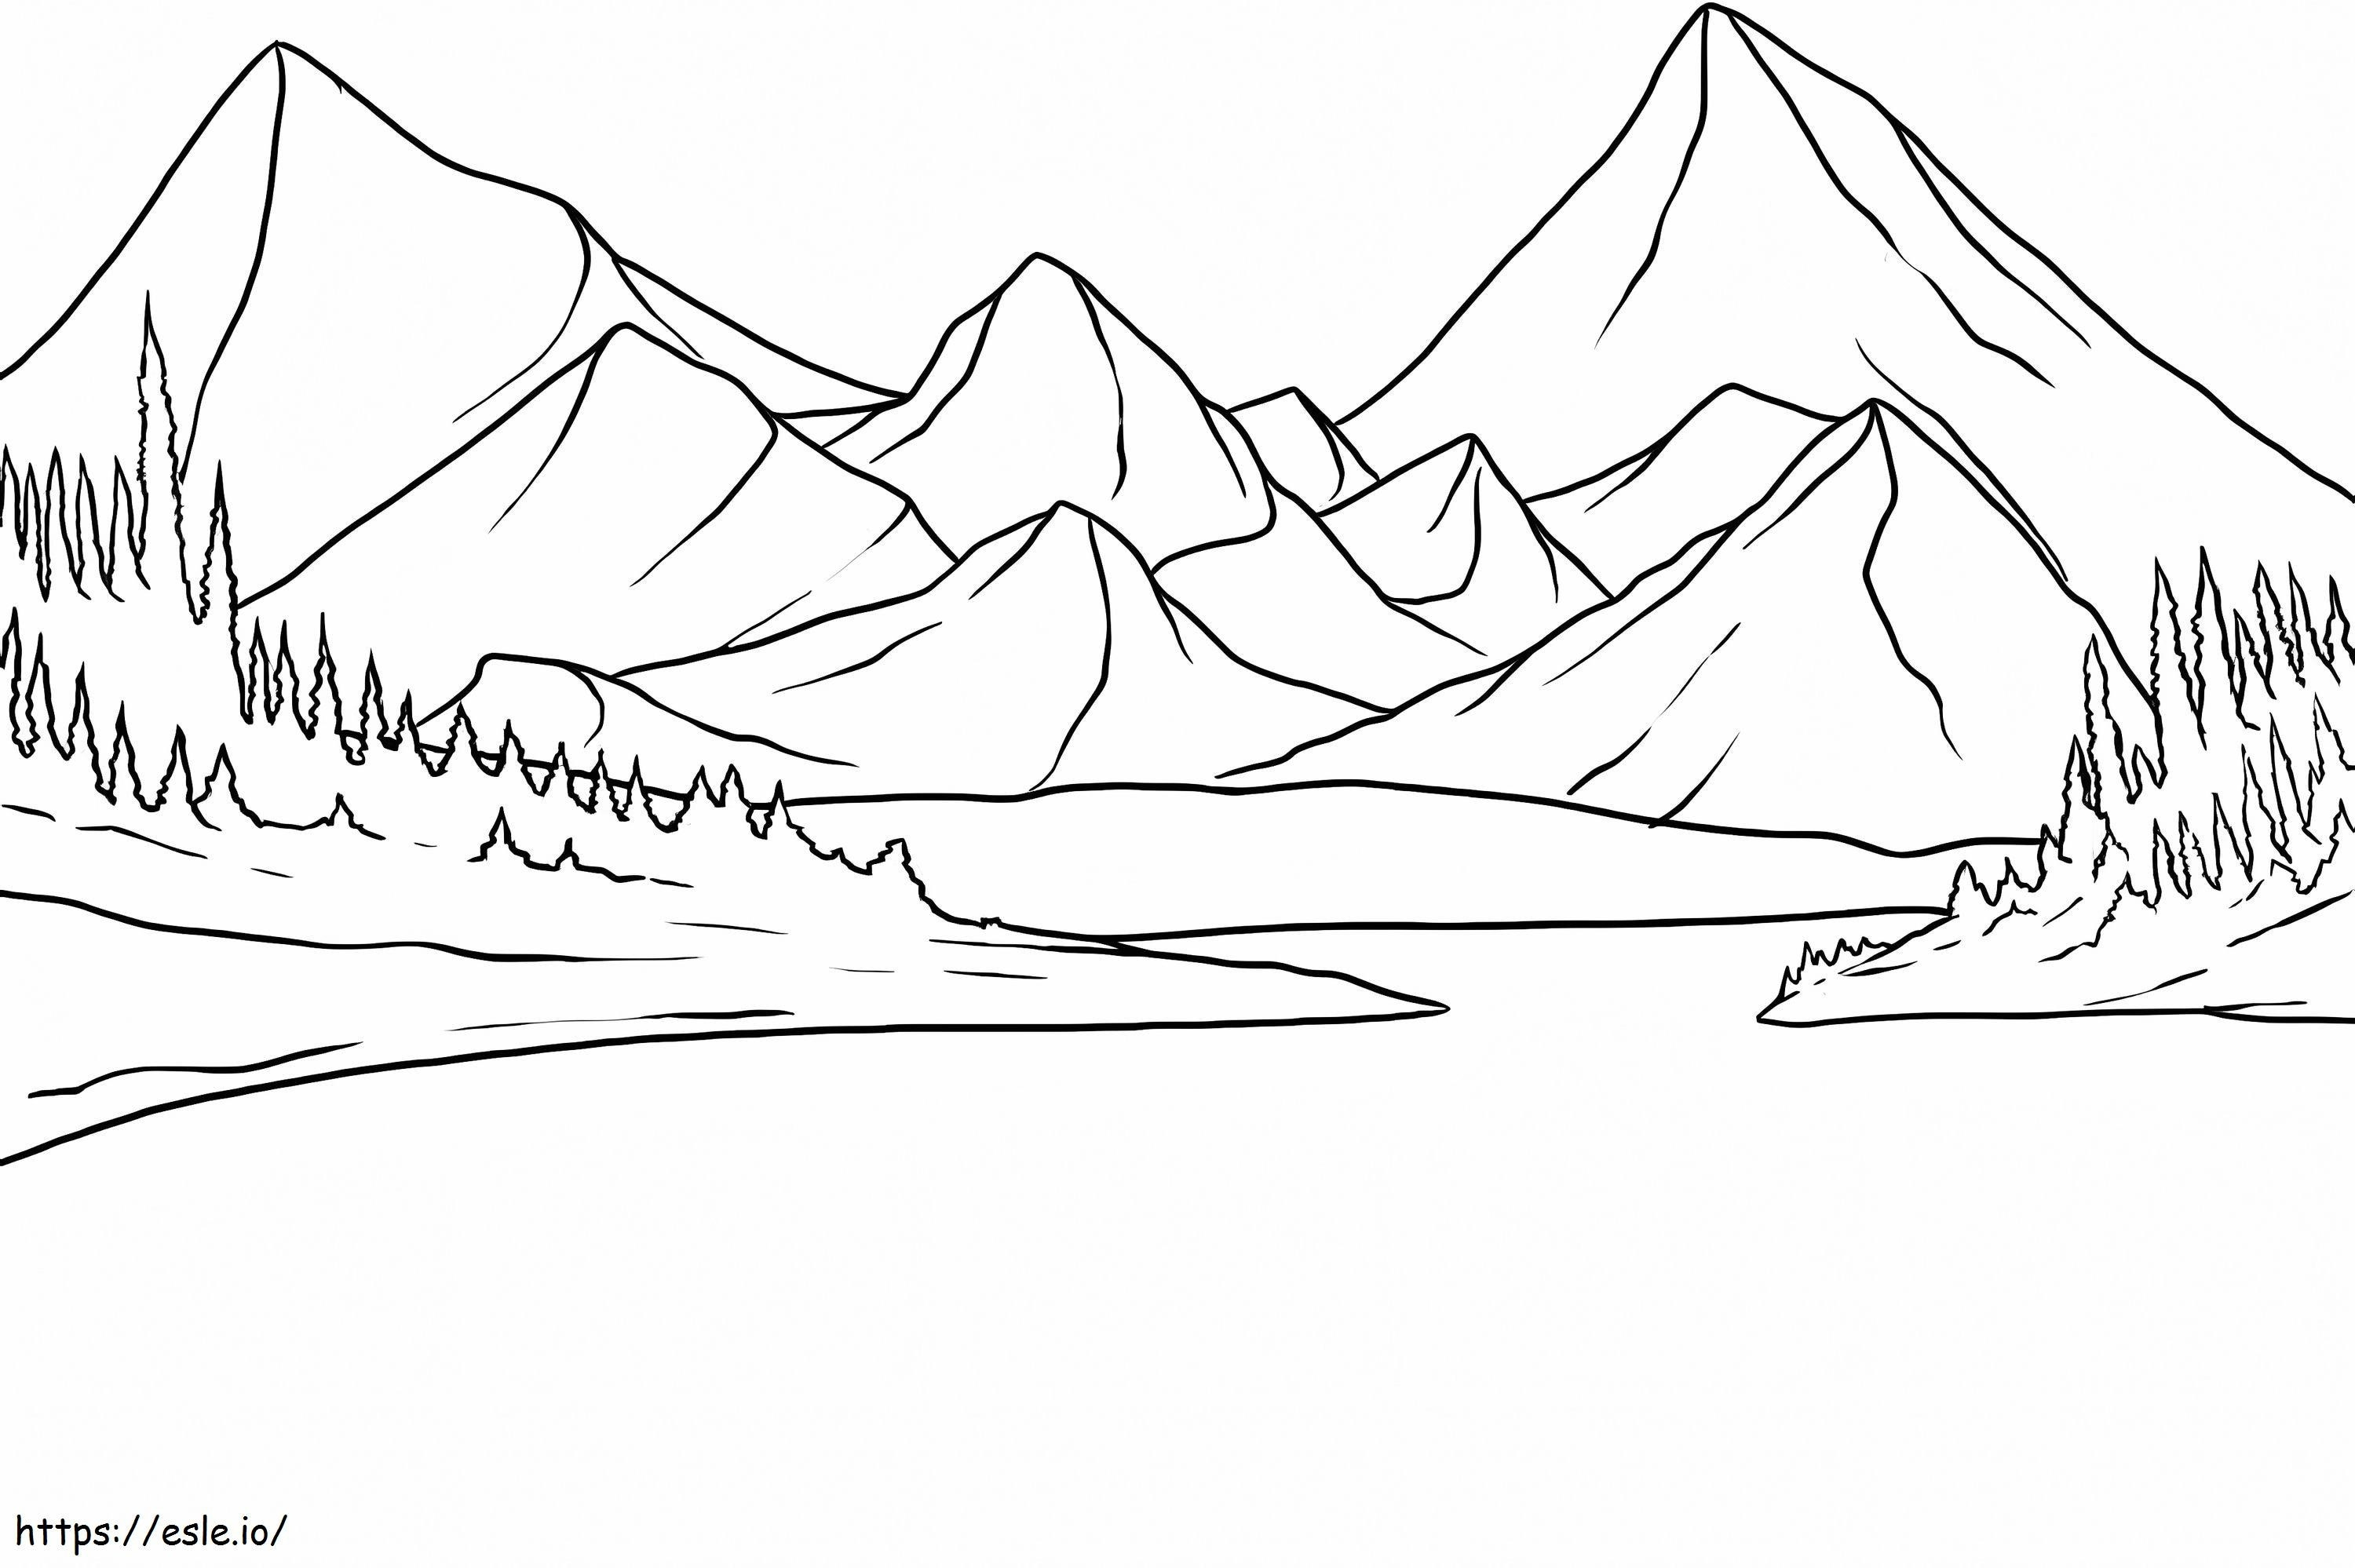 Enorme Montana coloring page